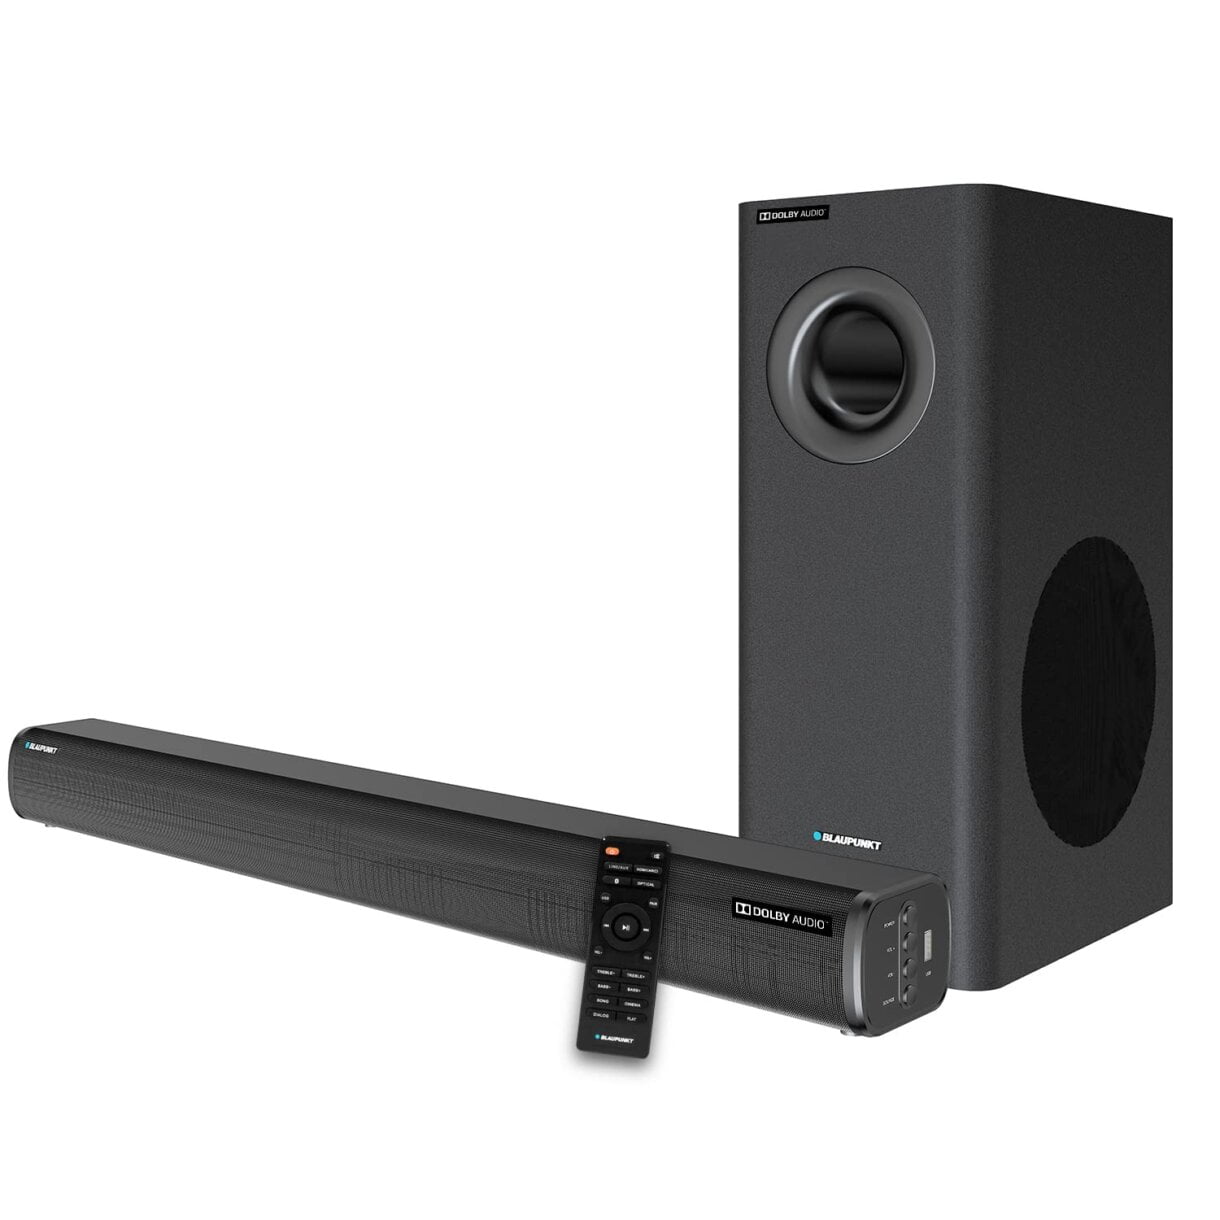 SBW07 2.1 Channel Dolby Audio Soundbar with Wired Subwoofer for Deep Bass, Home Theatre with HDMI ARC, Optical, AUX & Bluetooth Connectivity (Black)